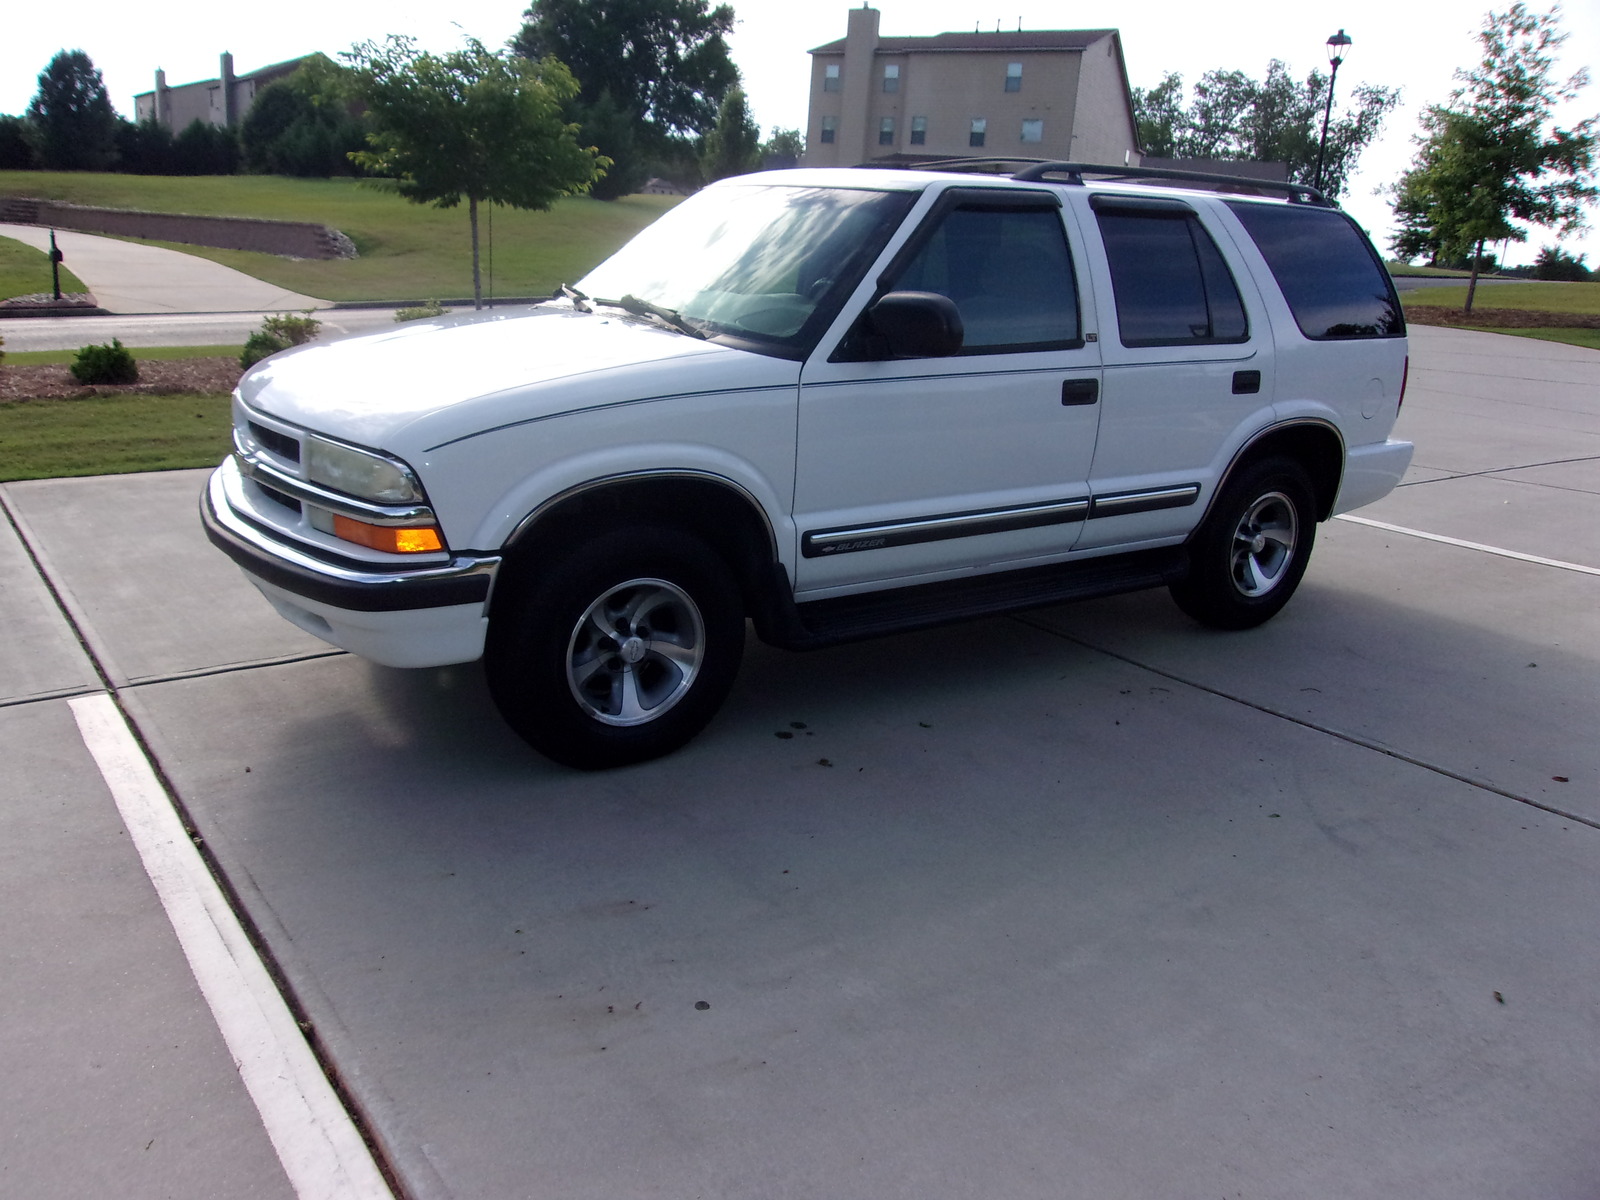 Used 2001 Chevrolet Blazer for Sale Right Now - Autotrader